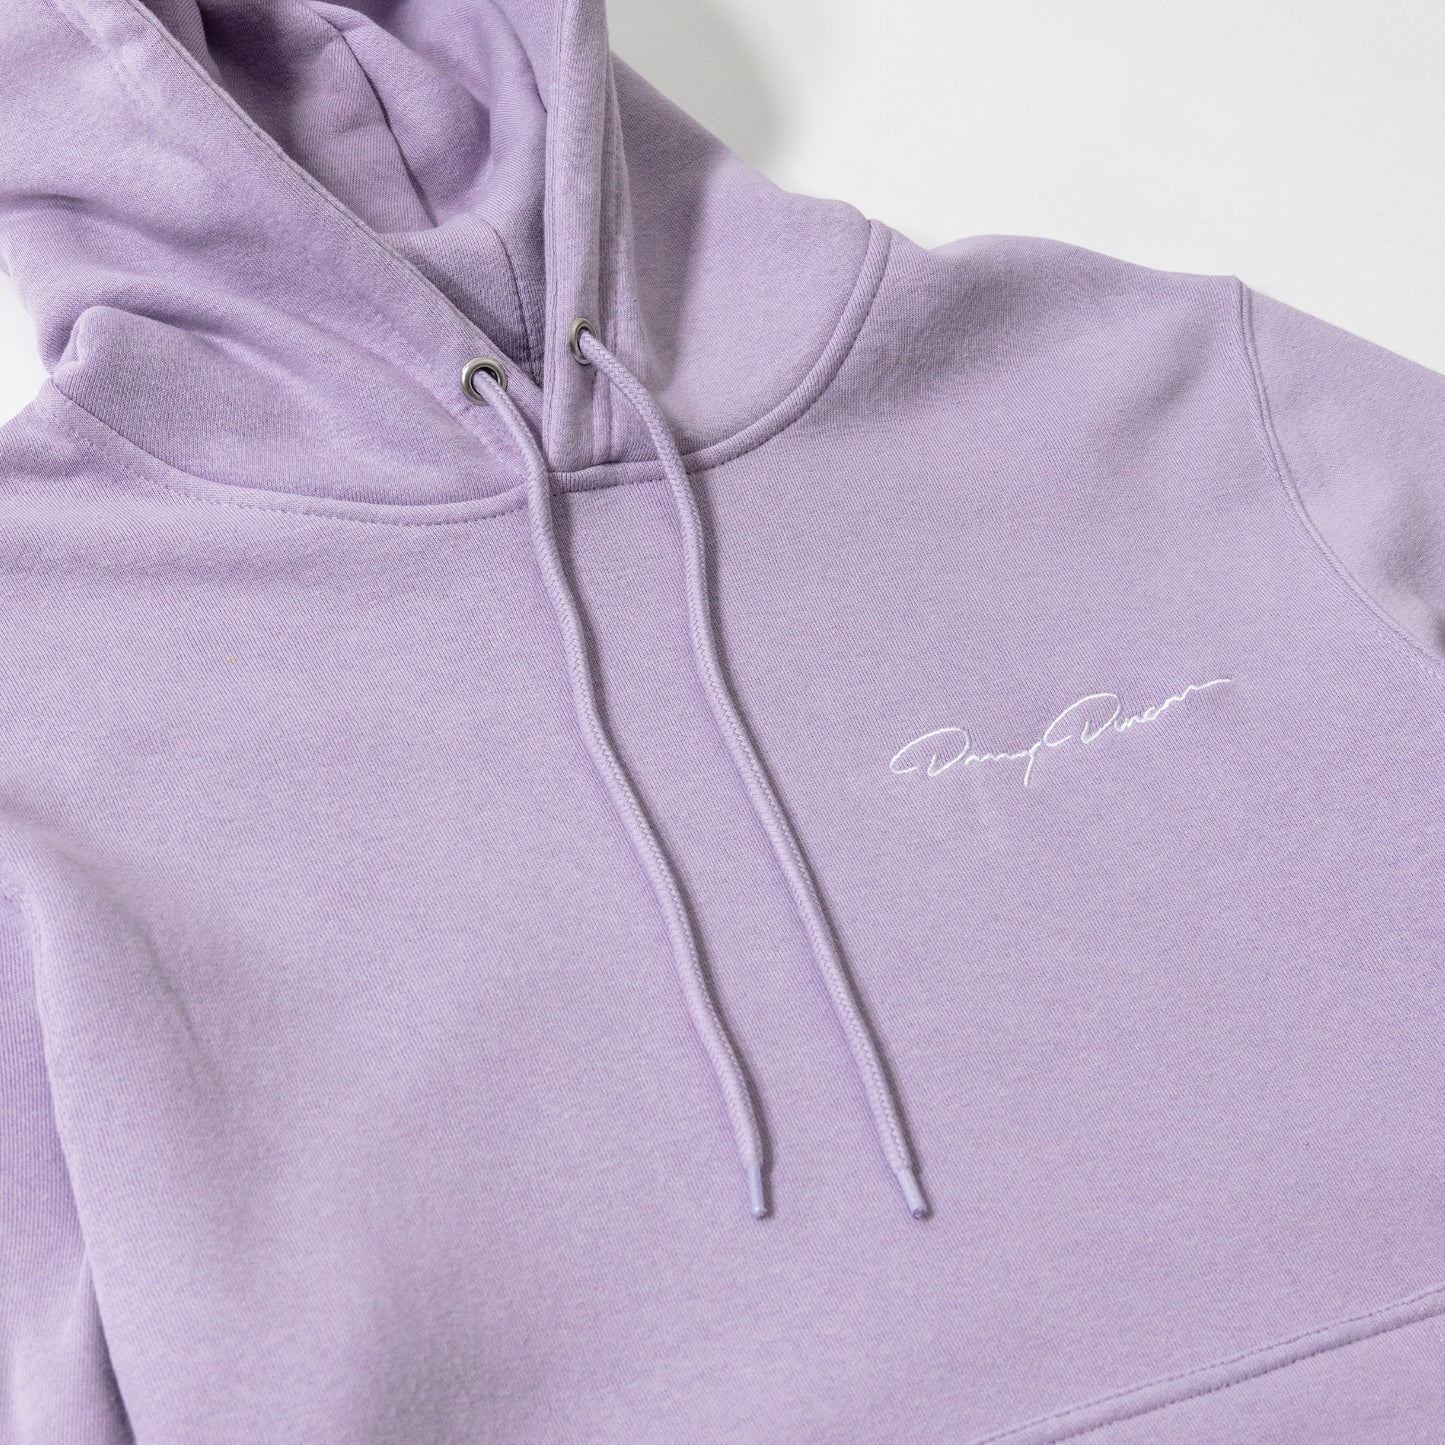 Signature Embroidered Lavender Hoodie – Danny Duncan